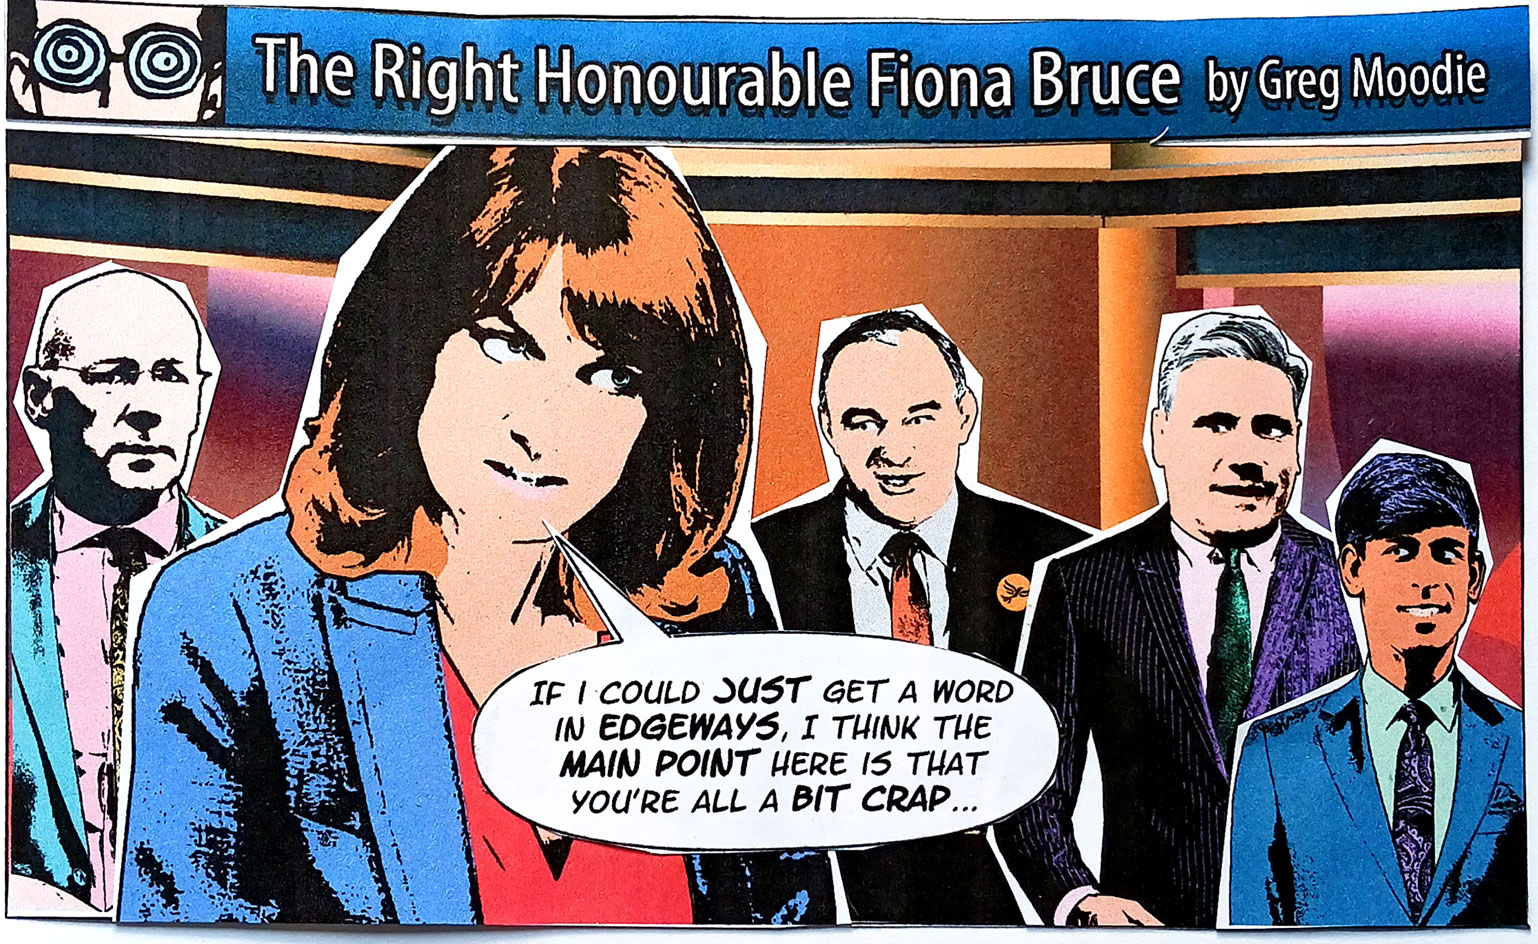 The Right Honourable Fiona Bruce